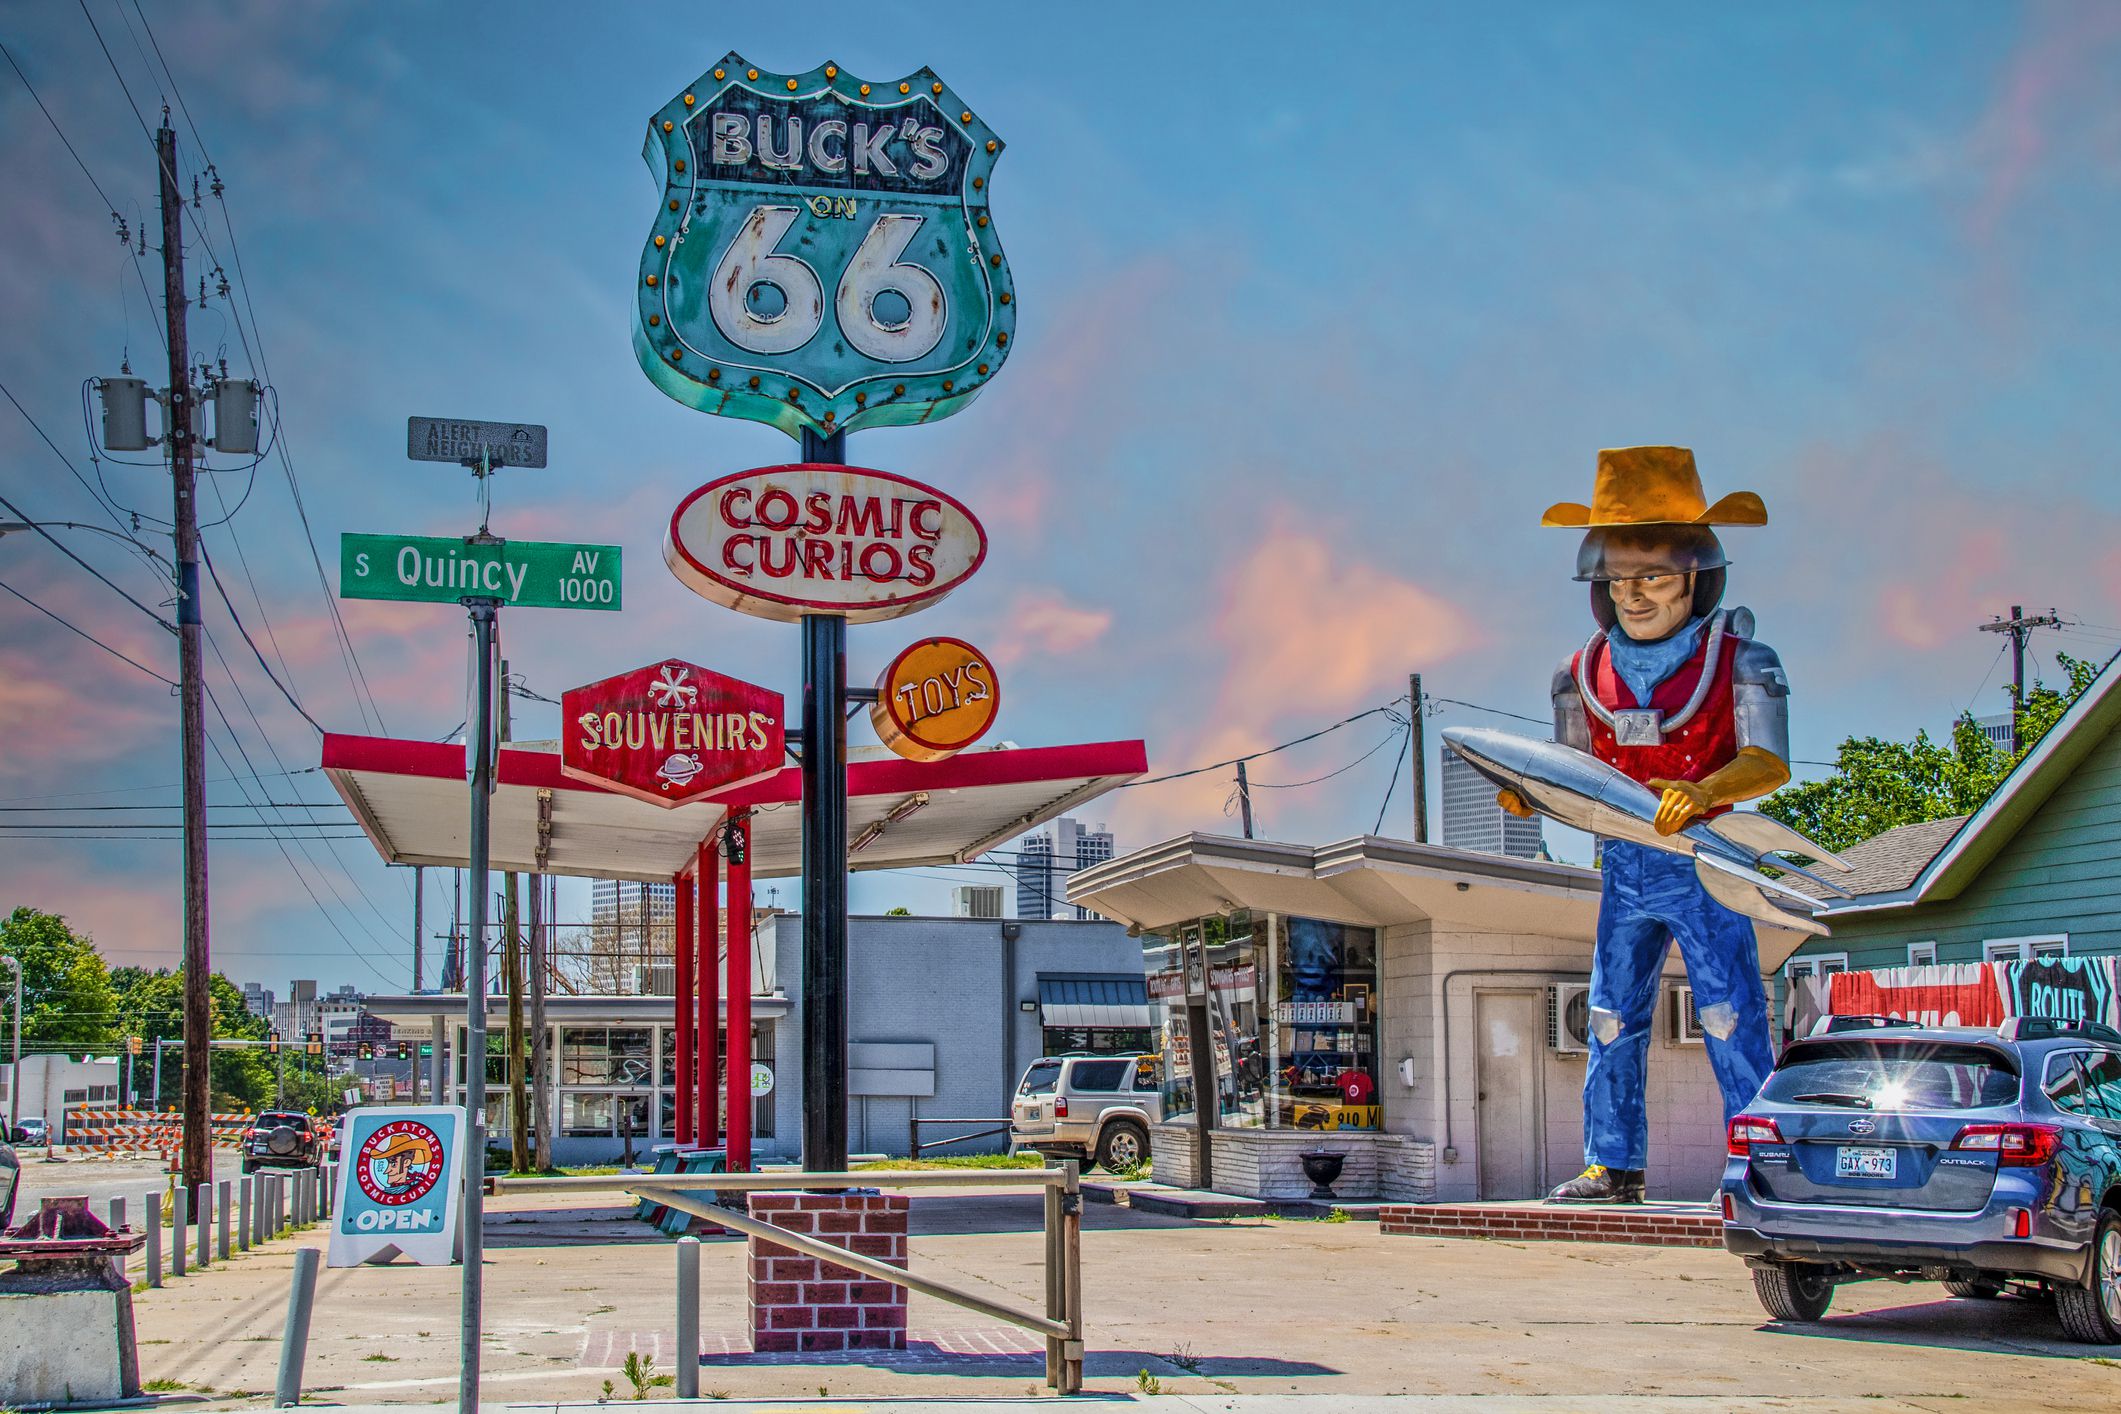 <b>Illinois, Missouri, Kansas, Oklahoma, Texas, New Mexico, Arizona, and California</b>What can be said about the Mother Road that hasn't already been said? <a href="https://blog.cheapism.com/how-route-66-has-changed/">Route 66</a> and its historic gas stations and kitschy diners still beckon, especially for those who want a relatively easy, nostalgic cruise. Opting to ride all of its 2,000-some miles could consume a two-week vacation (and then some). Mealer recommends that anyone short on time check out <a href="https://www.roadtripusa.com/route-66/arizona/">Arizona's stretch of the Mother Road</a>, where desert mesas and scenic valleys make for its most dazzling riding. "The best section is going to Oatman and sharing the road with wild burros," she says. Even better: This nearly 160-mile stretch, from the Colorado River to Ash Fork, is the longest continuous stretch of the original Route 66 still in existence.    <p><b>Can't-miss sight: </b>Enjoy a short, steep hike at <a href="https://www.nps.gov/waca/index.htm">Walnut Canyon National Monument</a>, just outside of Flagstaff, and marvel at the beauty of the canyon and ancient cliff dwellings tucked within. </p><p><b>Related:</b> <a href="https://blog.cheapism.com/hands-down-best-cross-country-road-trip-you-can-take-ever-now/">Every American Should Take This Road Trip at Least Once</a></p>